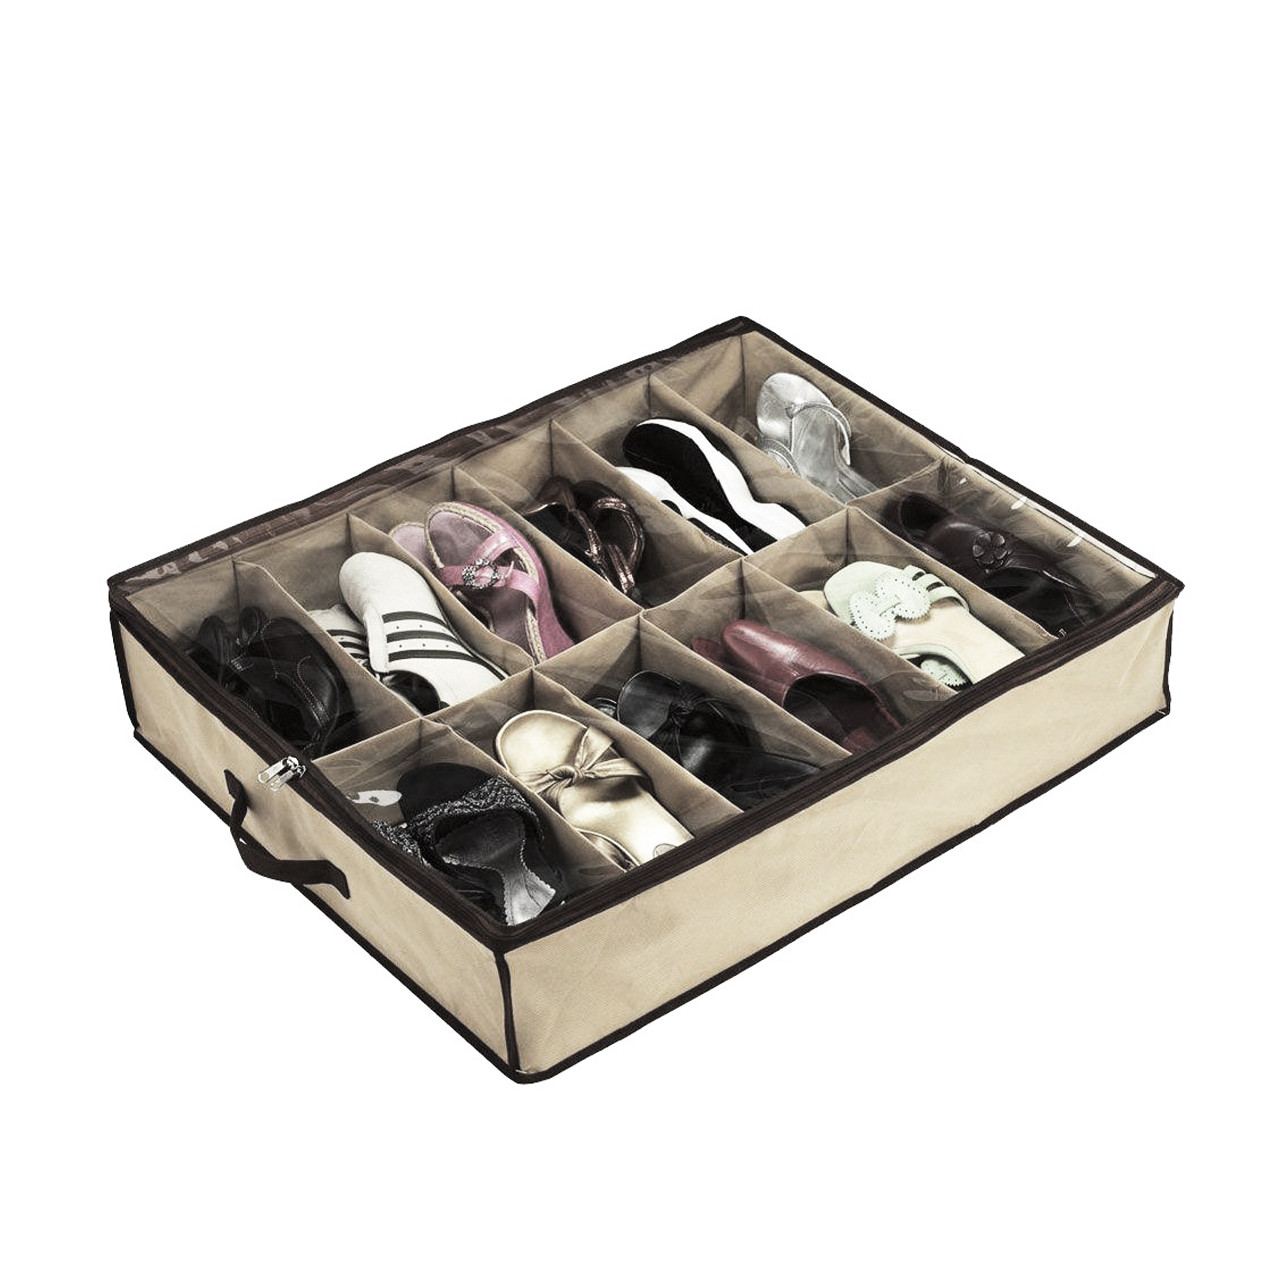 Shoe organizer for 12 pairs of shoes